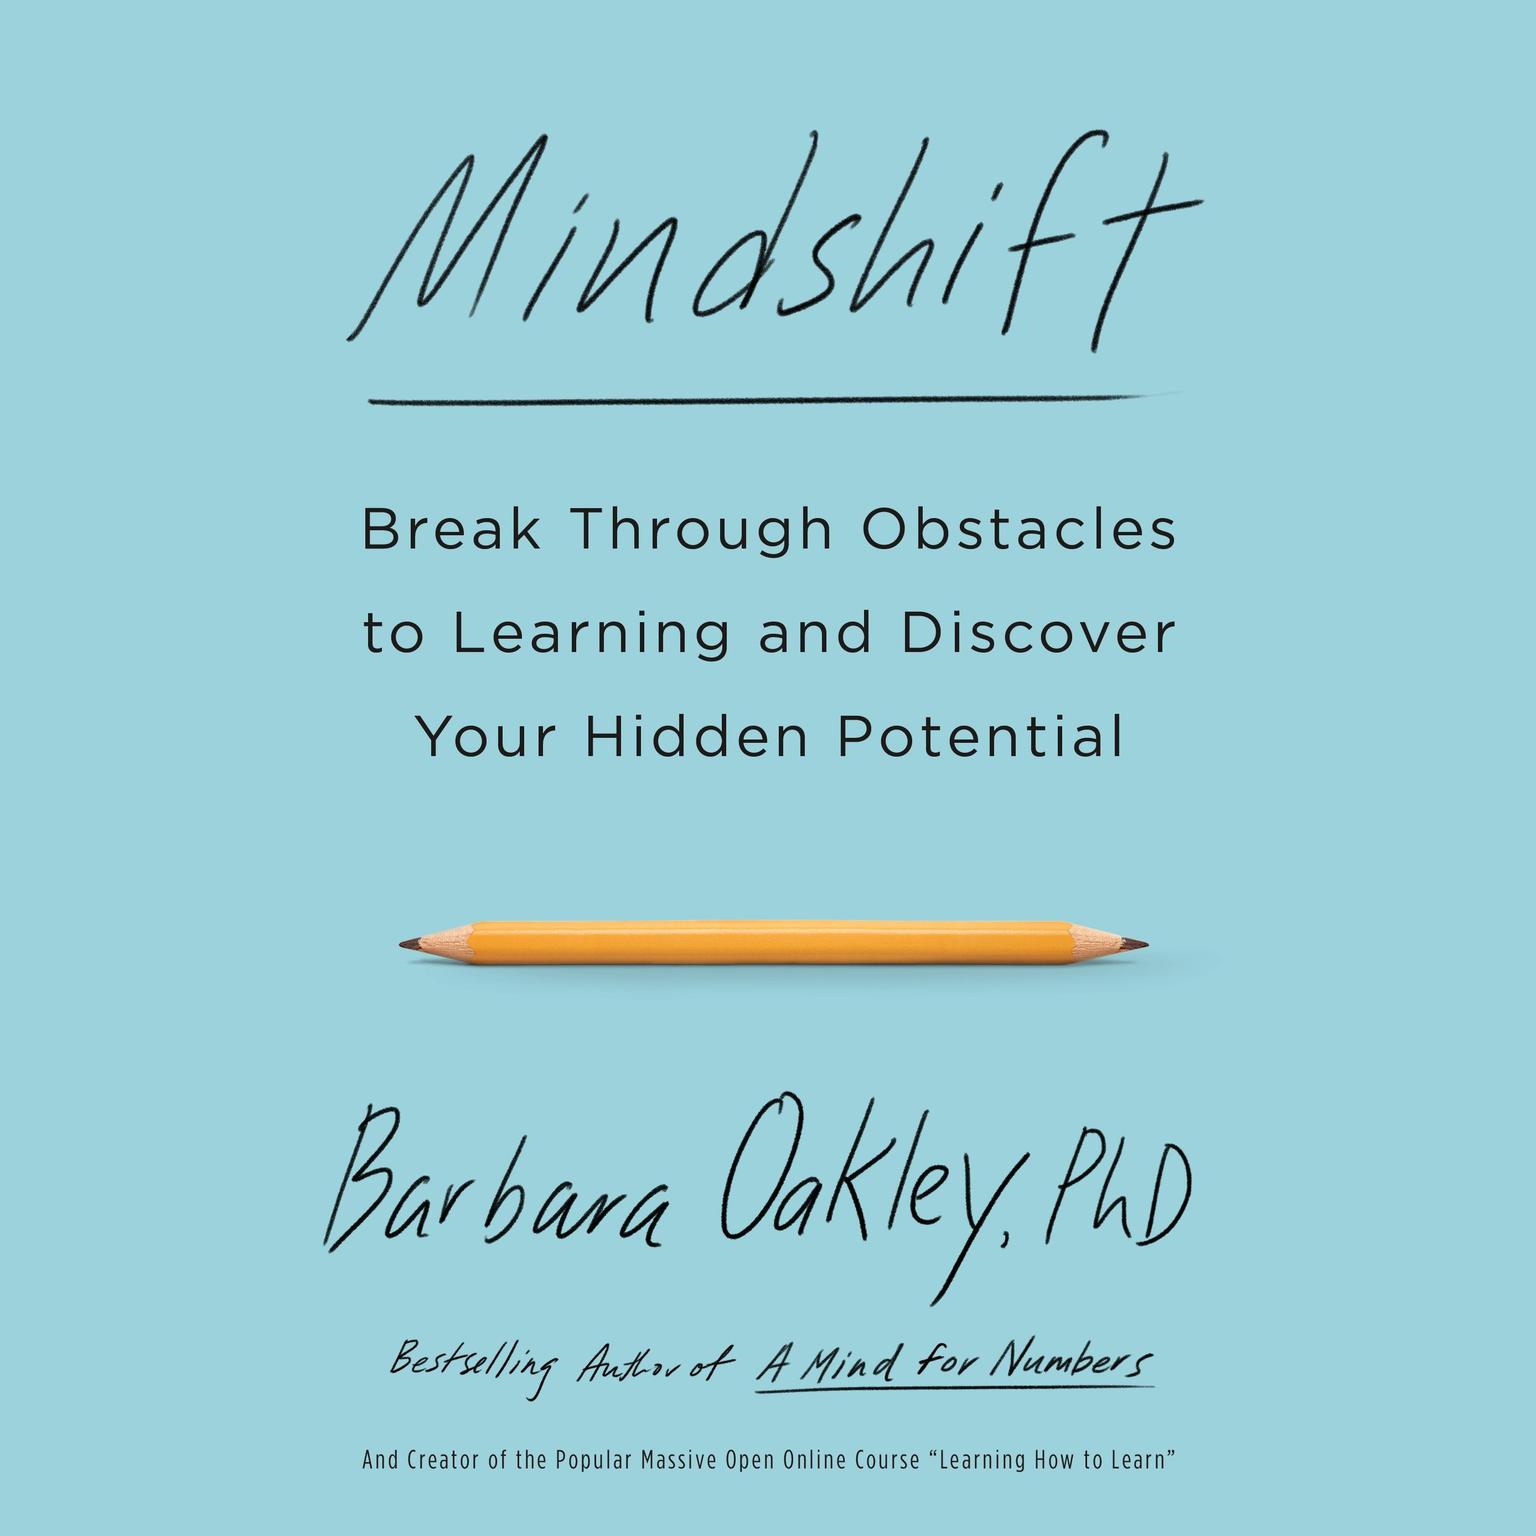 Mindshift: Break Through Obstacles to Learning and Discover Your Hidden Potential Audiobook, by Barbara Oakley